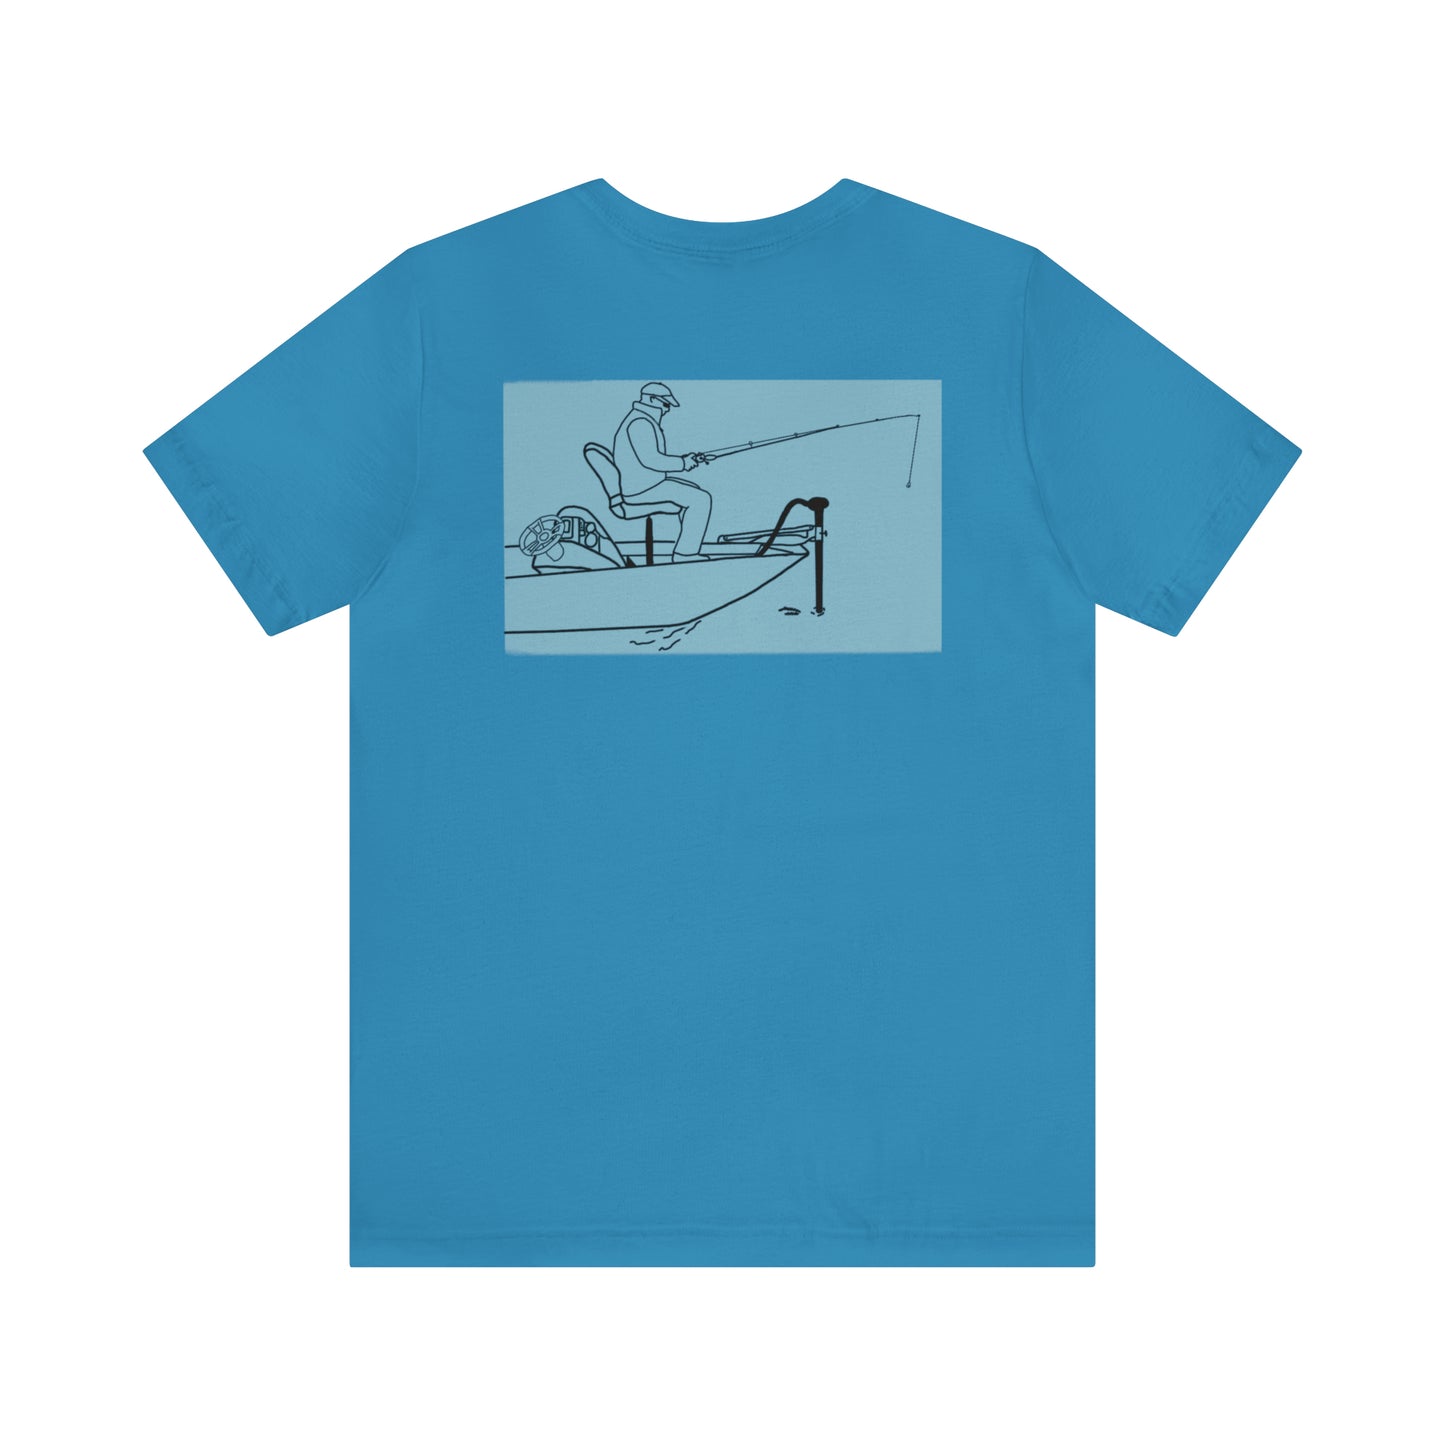 Fowler Lake front, Fishing with Blue Background - Bella & Canvas Unisex Short Sleeve Tee